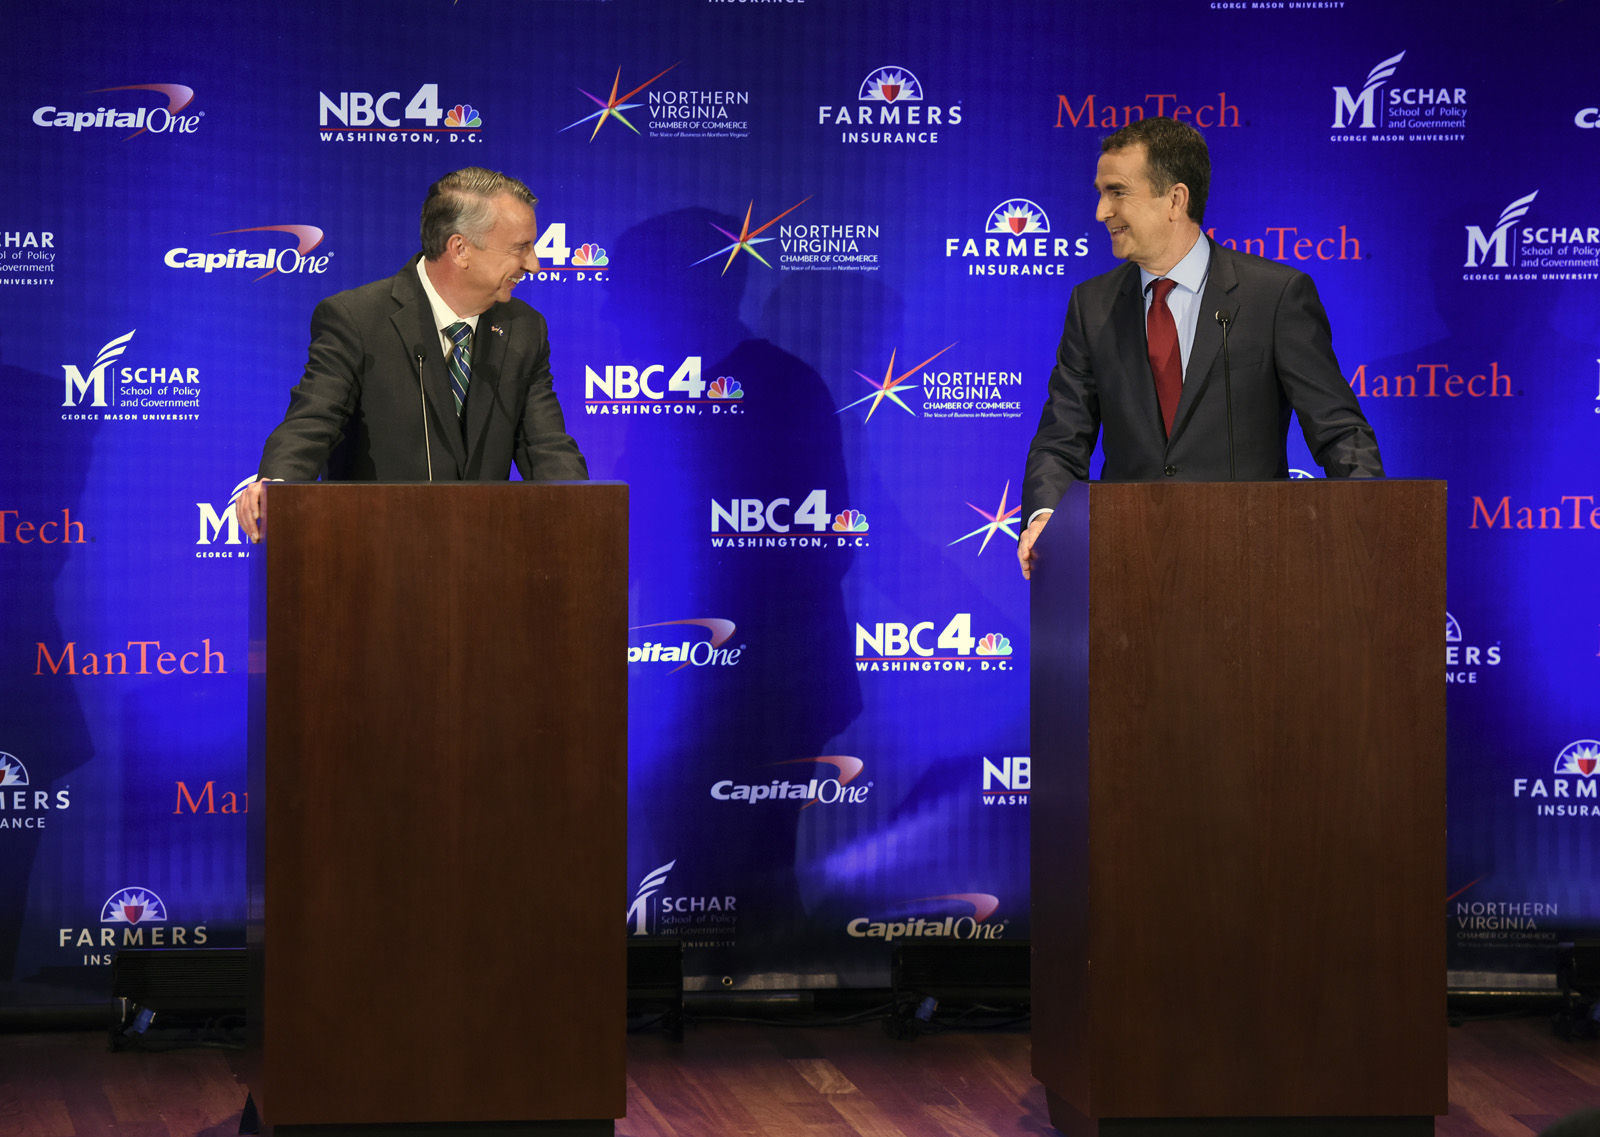 MCLEAN, VA - SEPTEMBER 19:
Republican candidate Ed Gillespie, left, and Lt. Gov. Ralph Northam, Democrat, greet each other before the start of the Gubernatorial debate on September, 19, 2017 in McLean, VA.
(Pool Photo by Bill O'Leary/The Washington Post)